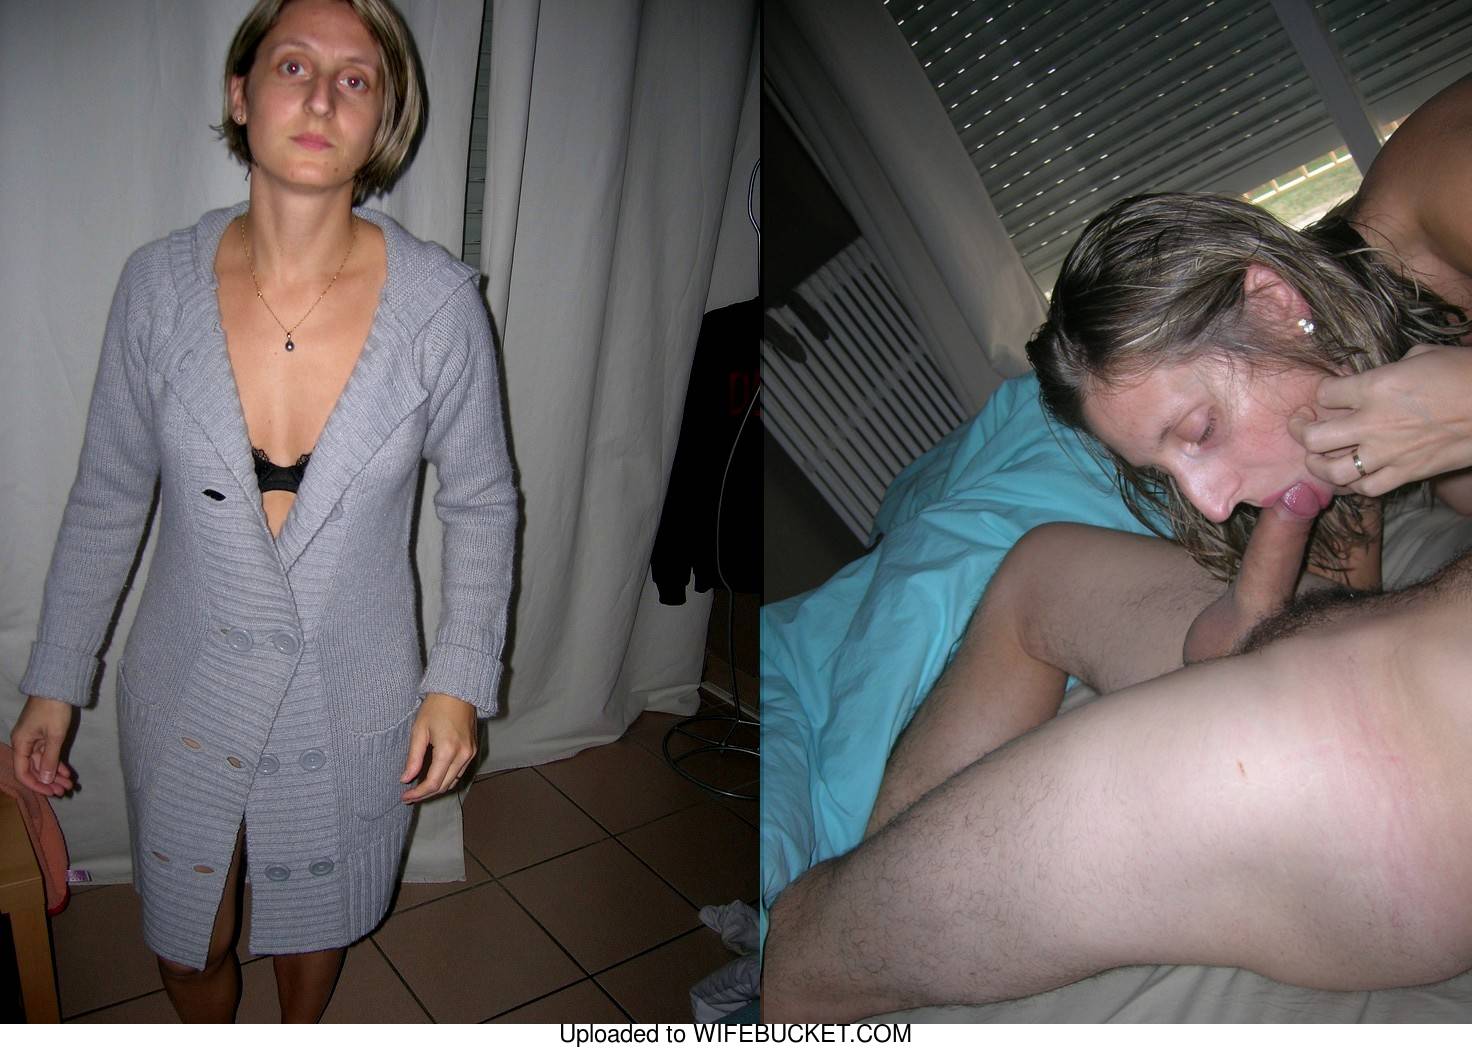 Before And After Wives Blowjob - 40 (yes, FOURTY) before-after blowjobs pics exposing real wives from our  archive! â€“ WifeBucket | Offical MILF Blog